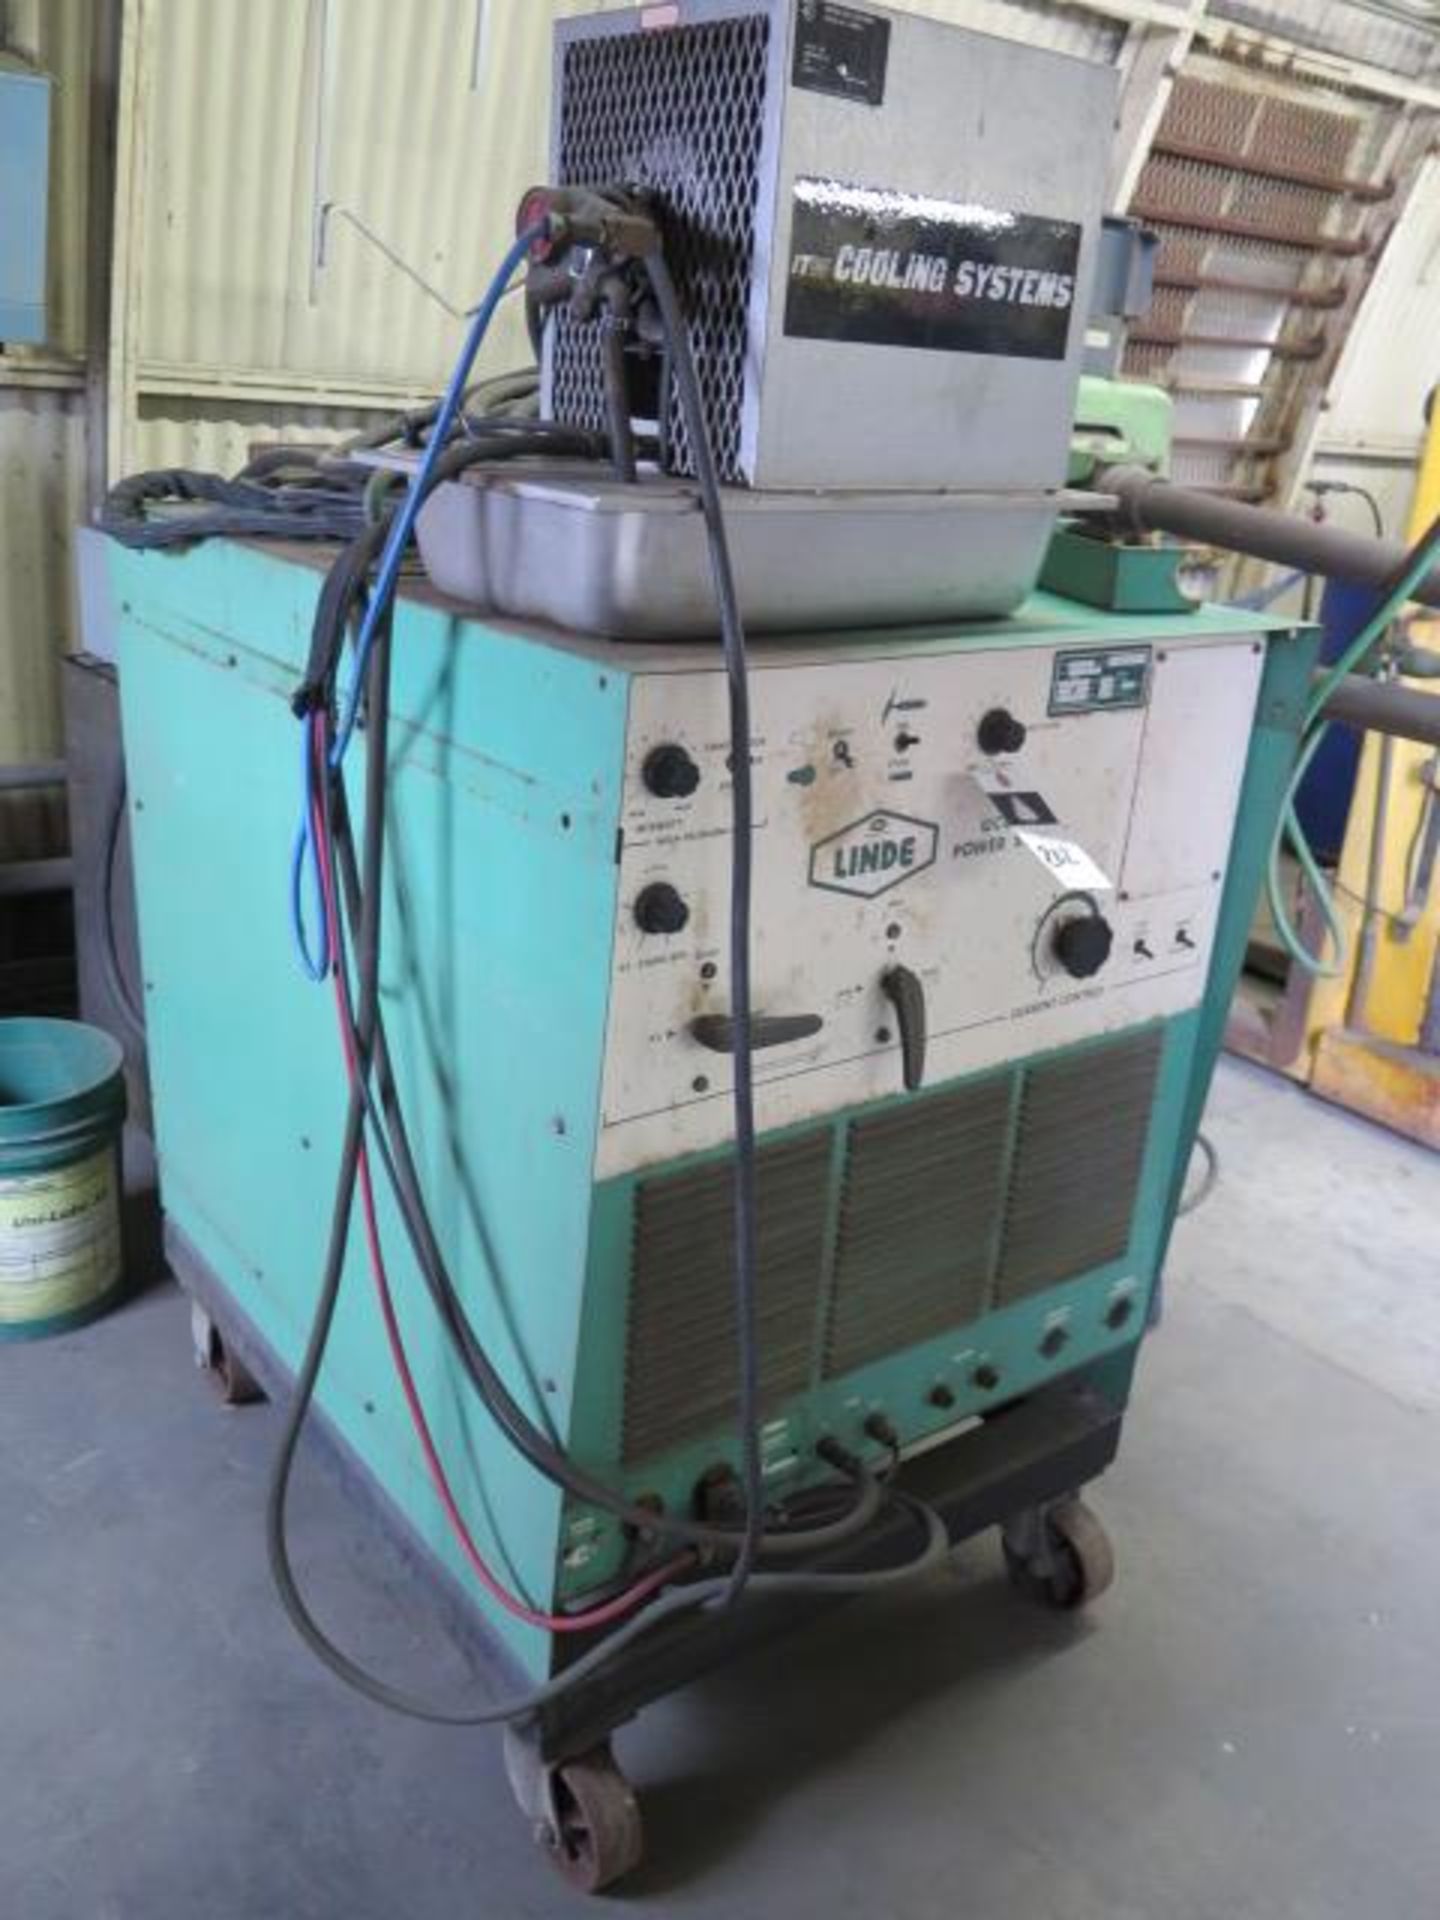 Linde UCC-305 Arc Welding Power Source w/ ITW Cooler (SOLD AS-IS - NO WARRANTY) - Image 2 of 8